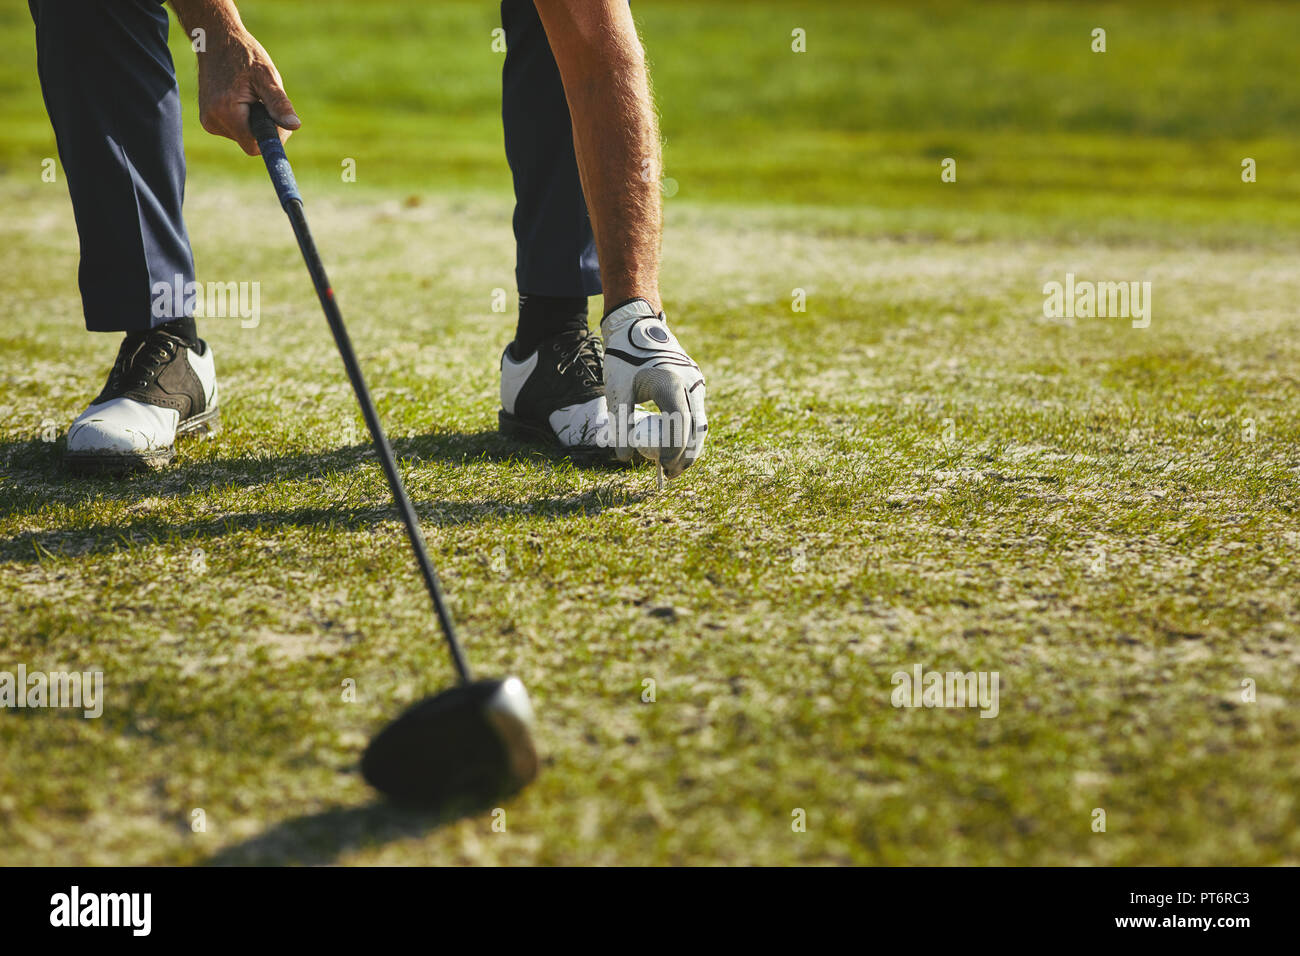 Closeup of a senior man placing a golf ball on a tee while standing on a golf course on a sunny day Stock Photo